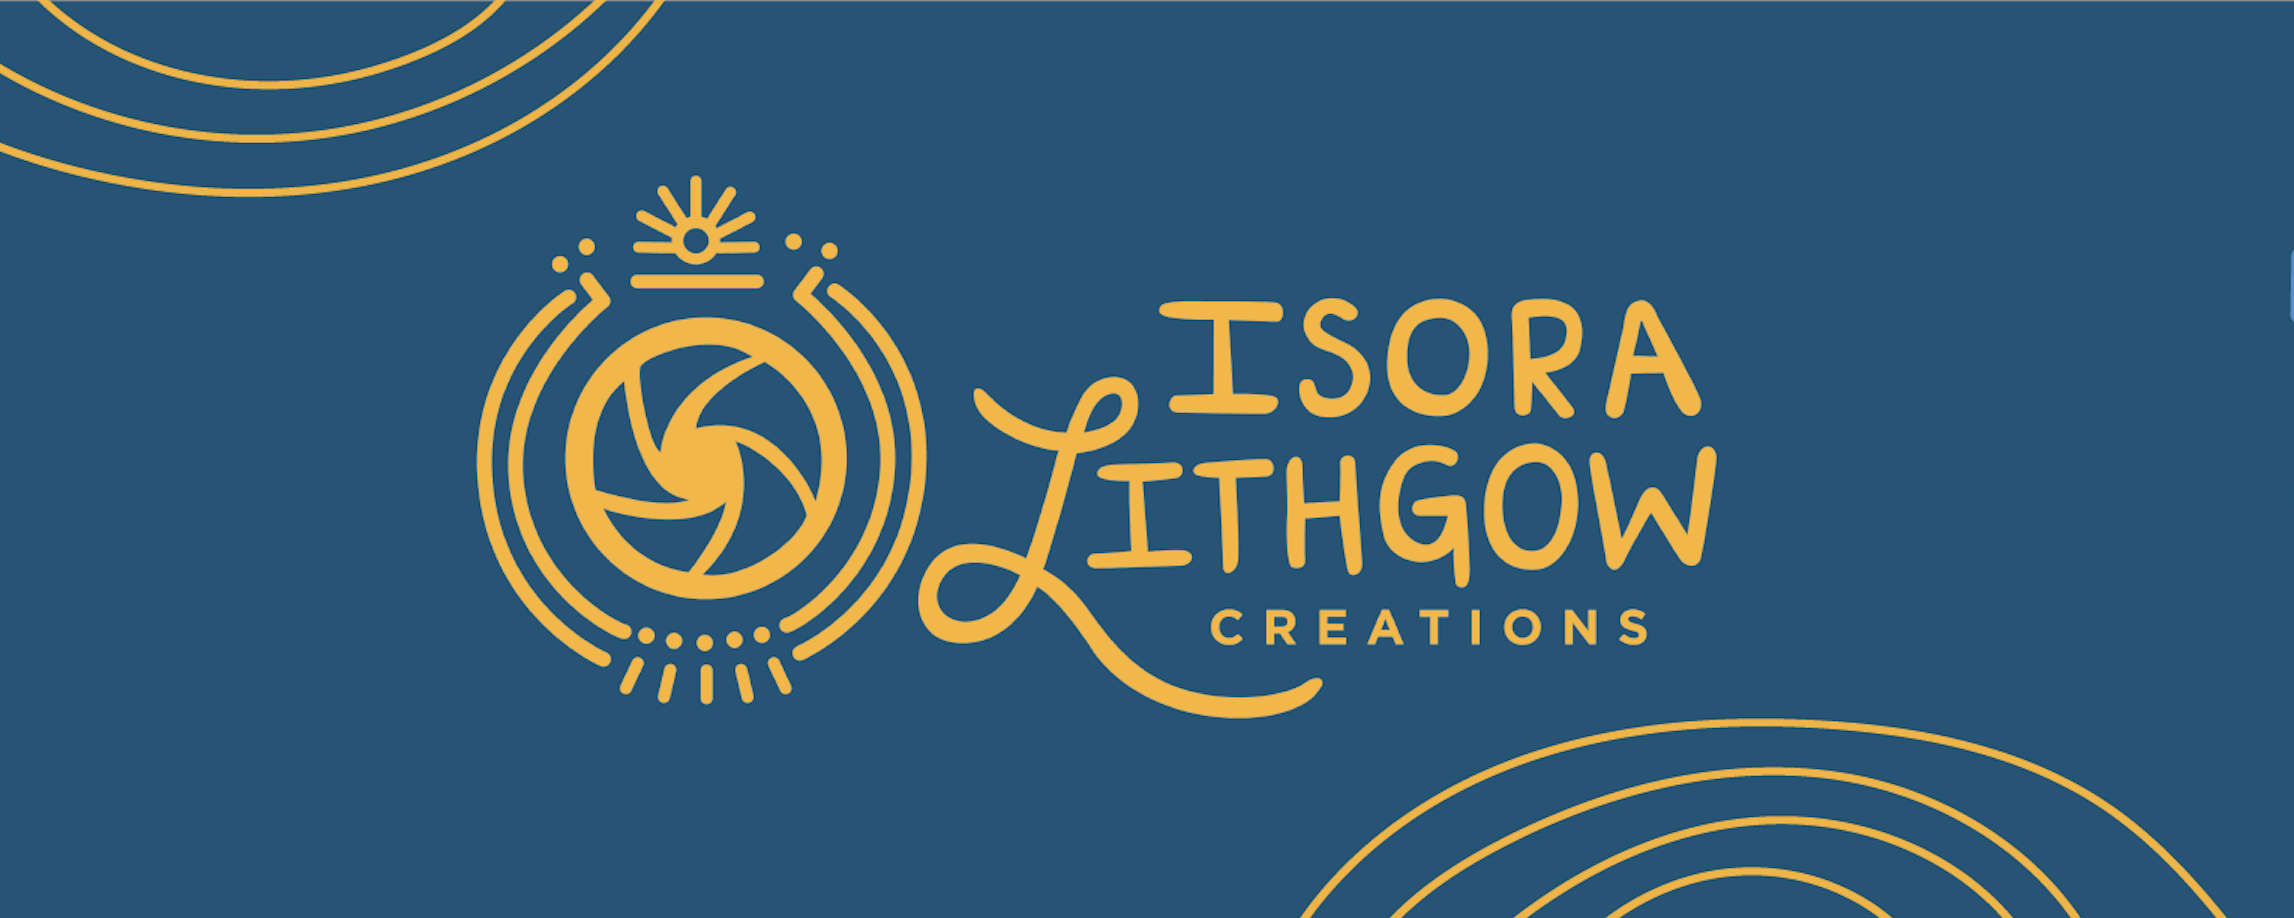 Isora Lithgow Creations